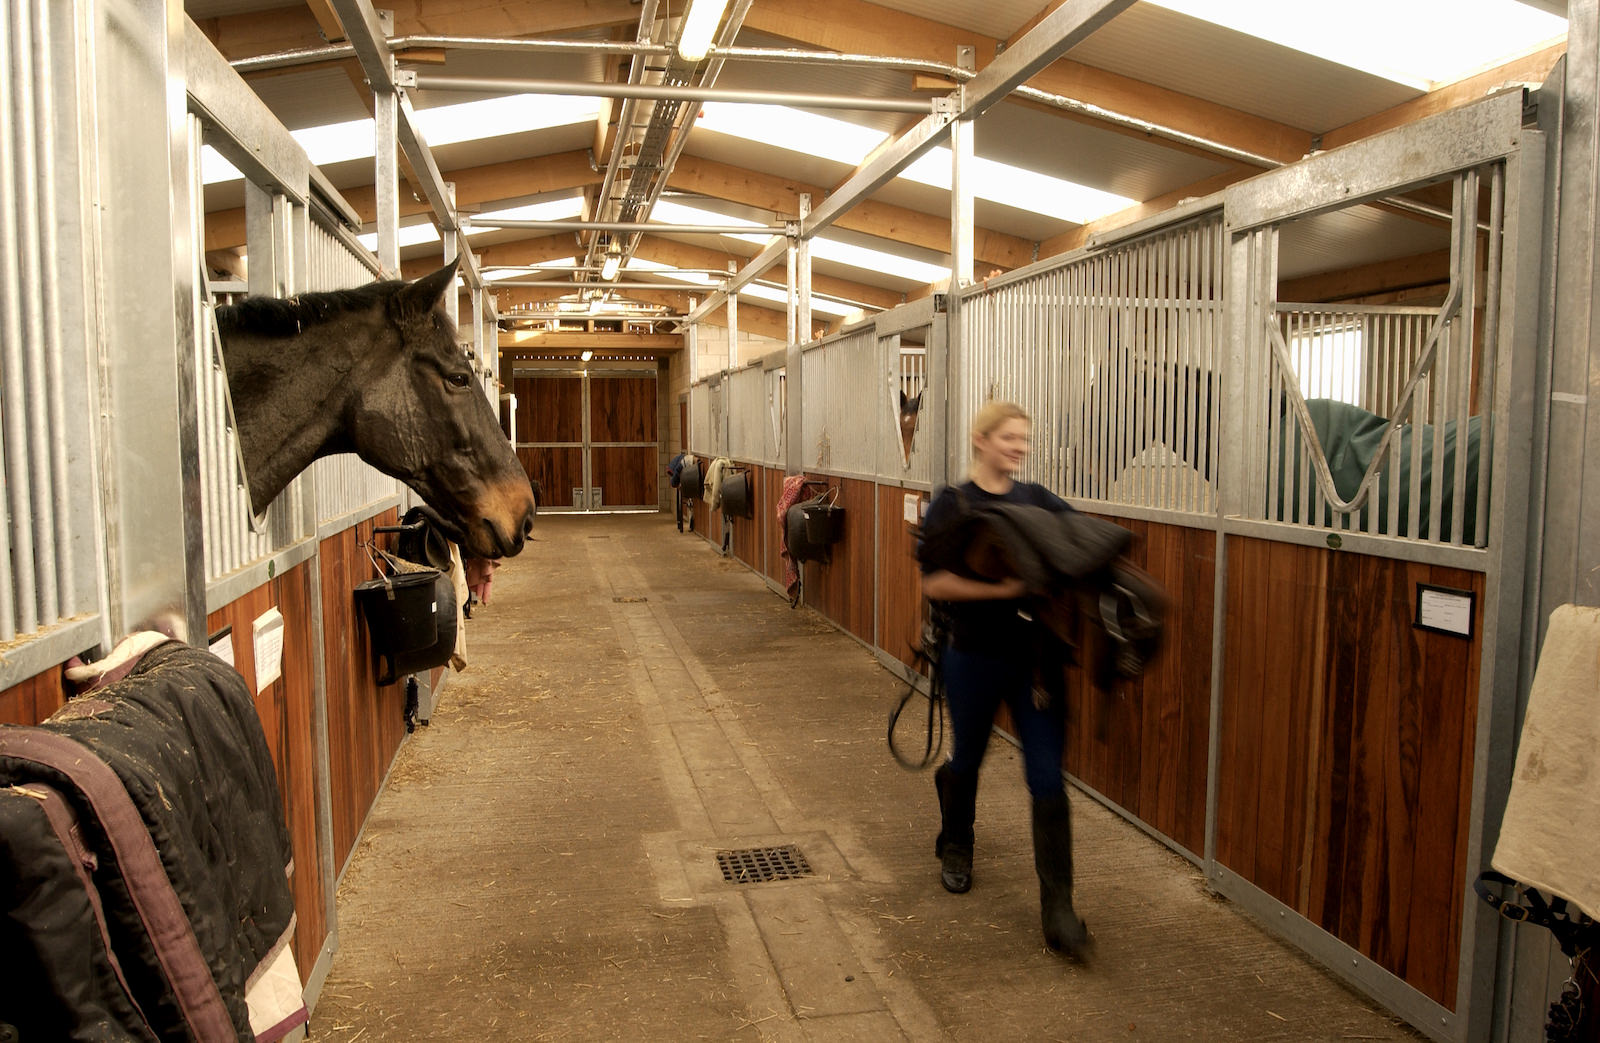 internal view of the riseholme equine centre with a horse on the foreground